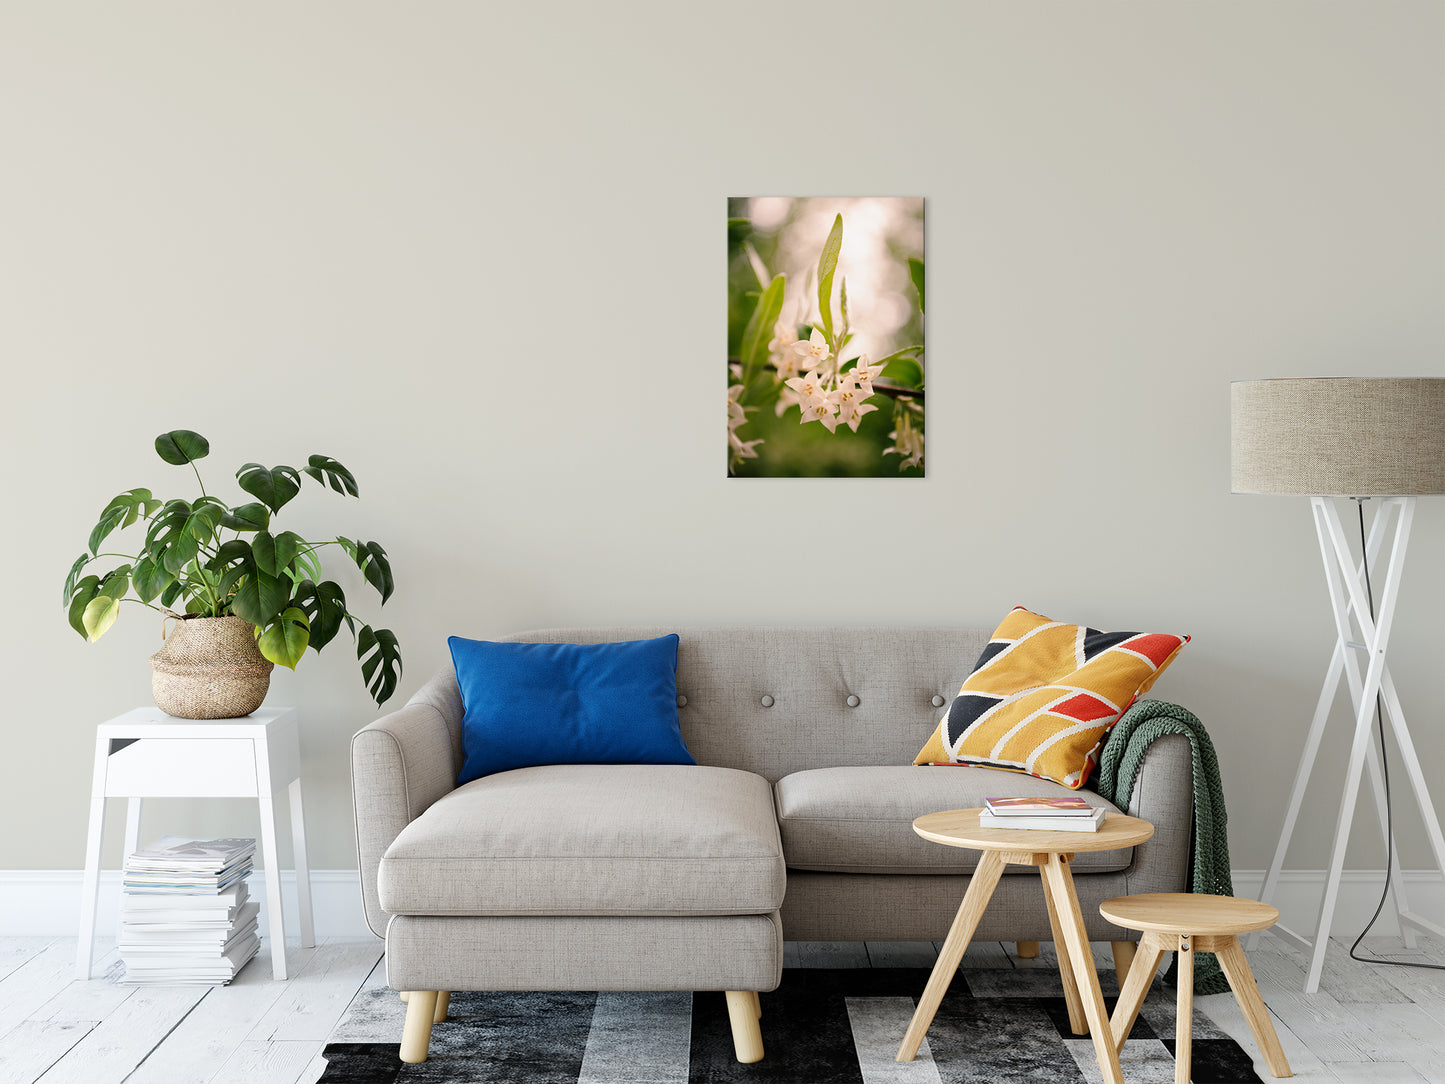 Floral Tranquility Nature / Floral Photo Fine Art Canvas Wall Art Prints 20" x 24" - PIPAFINEART